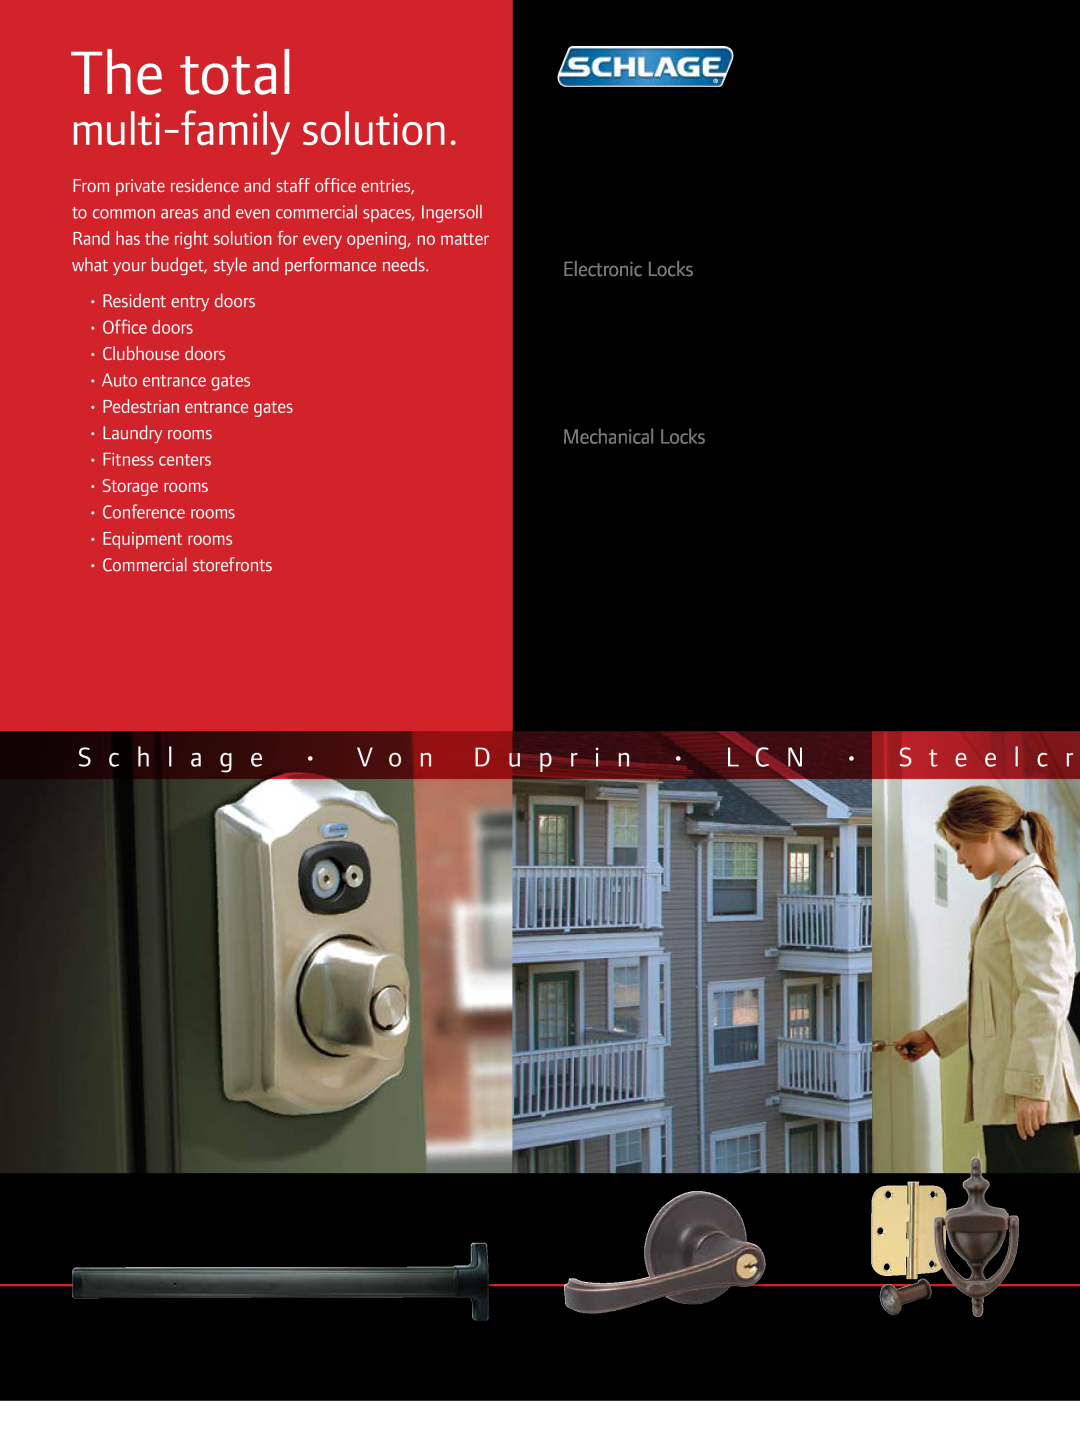 Ingersoll-Rand Residential Security manual The total, multi-familysolution, From private residence and staff office entries 